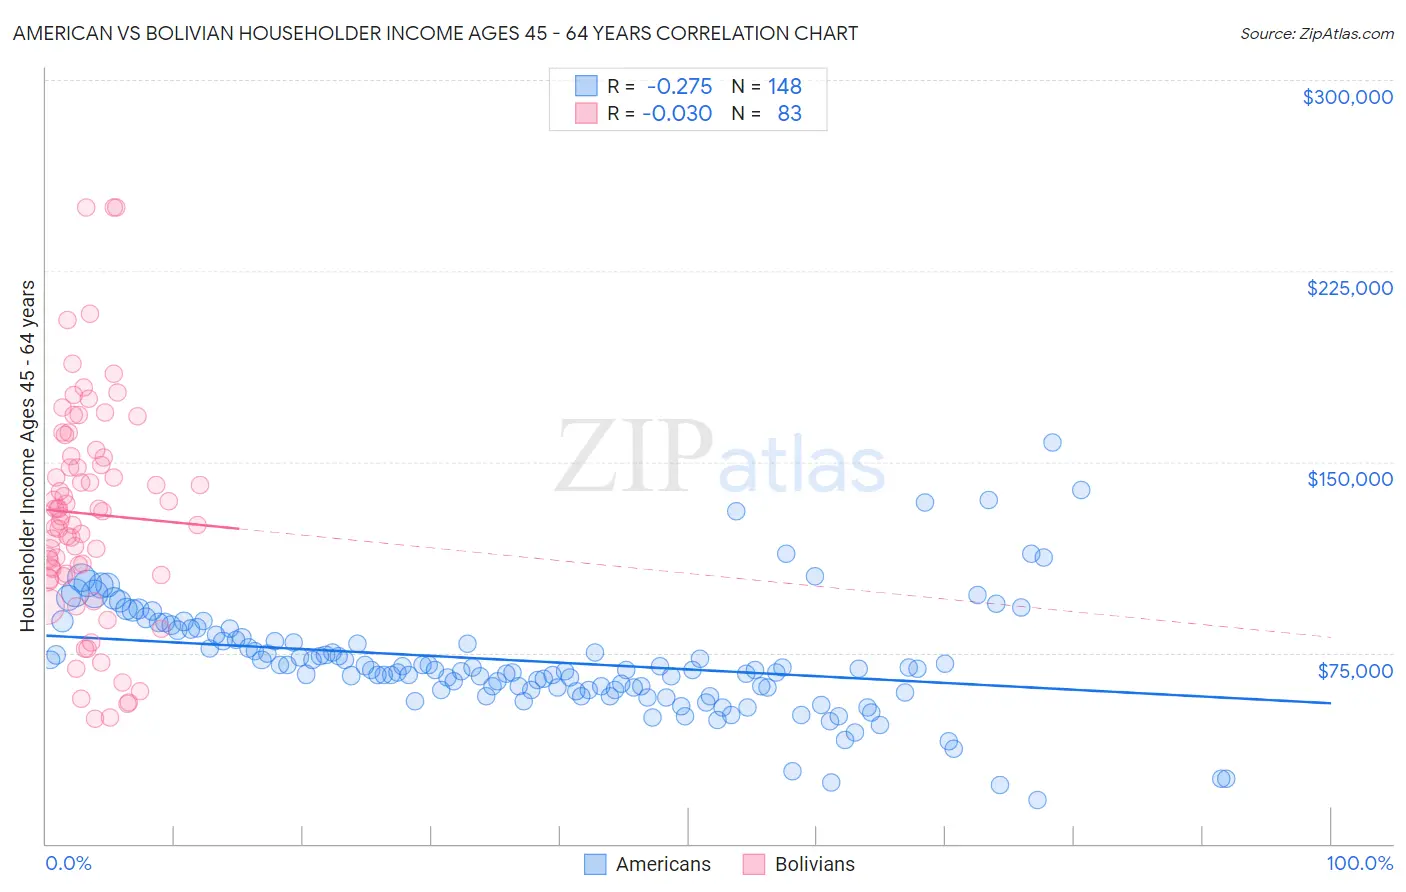 American vs Bolivian Householder Income Ages 45 - 64 years